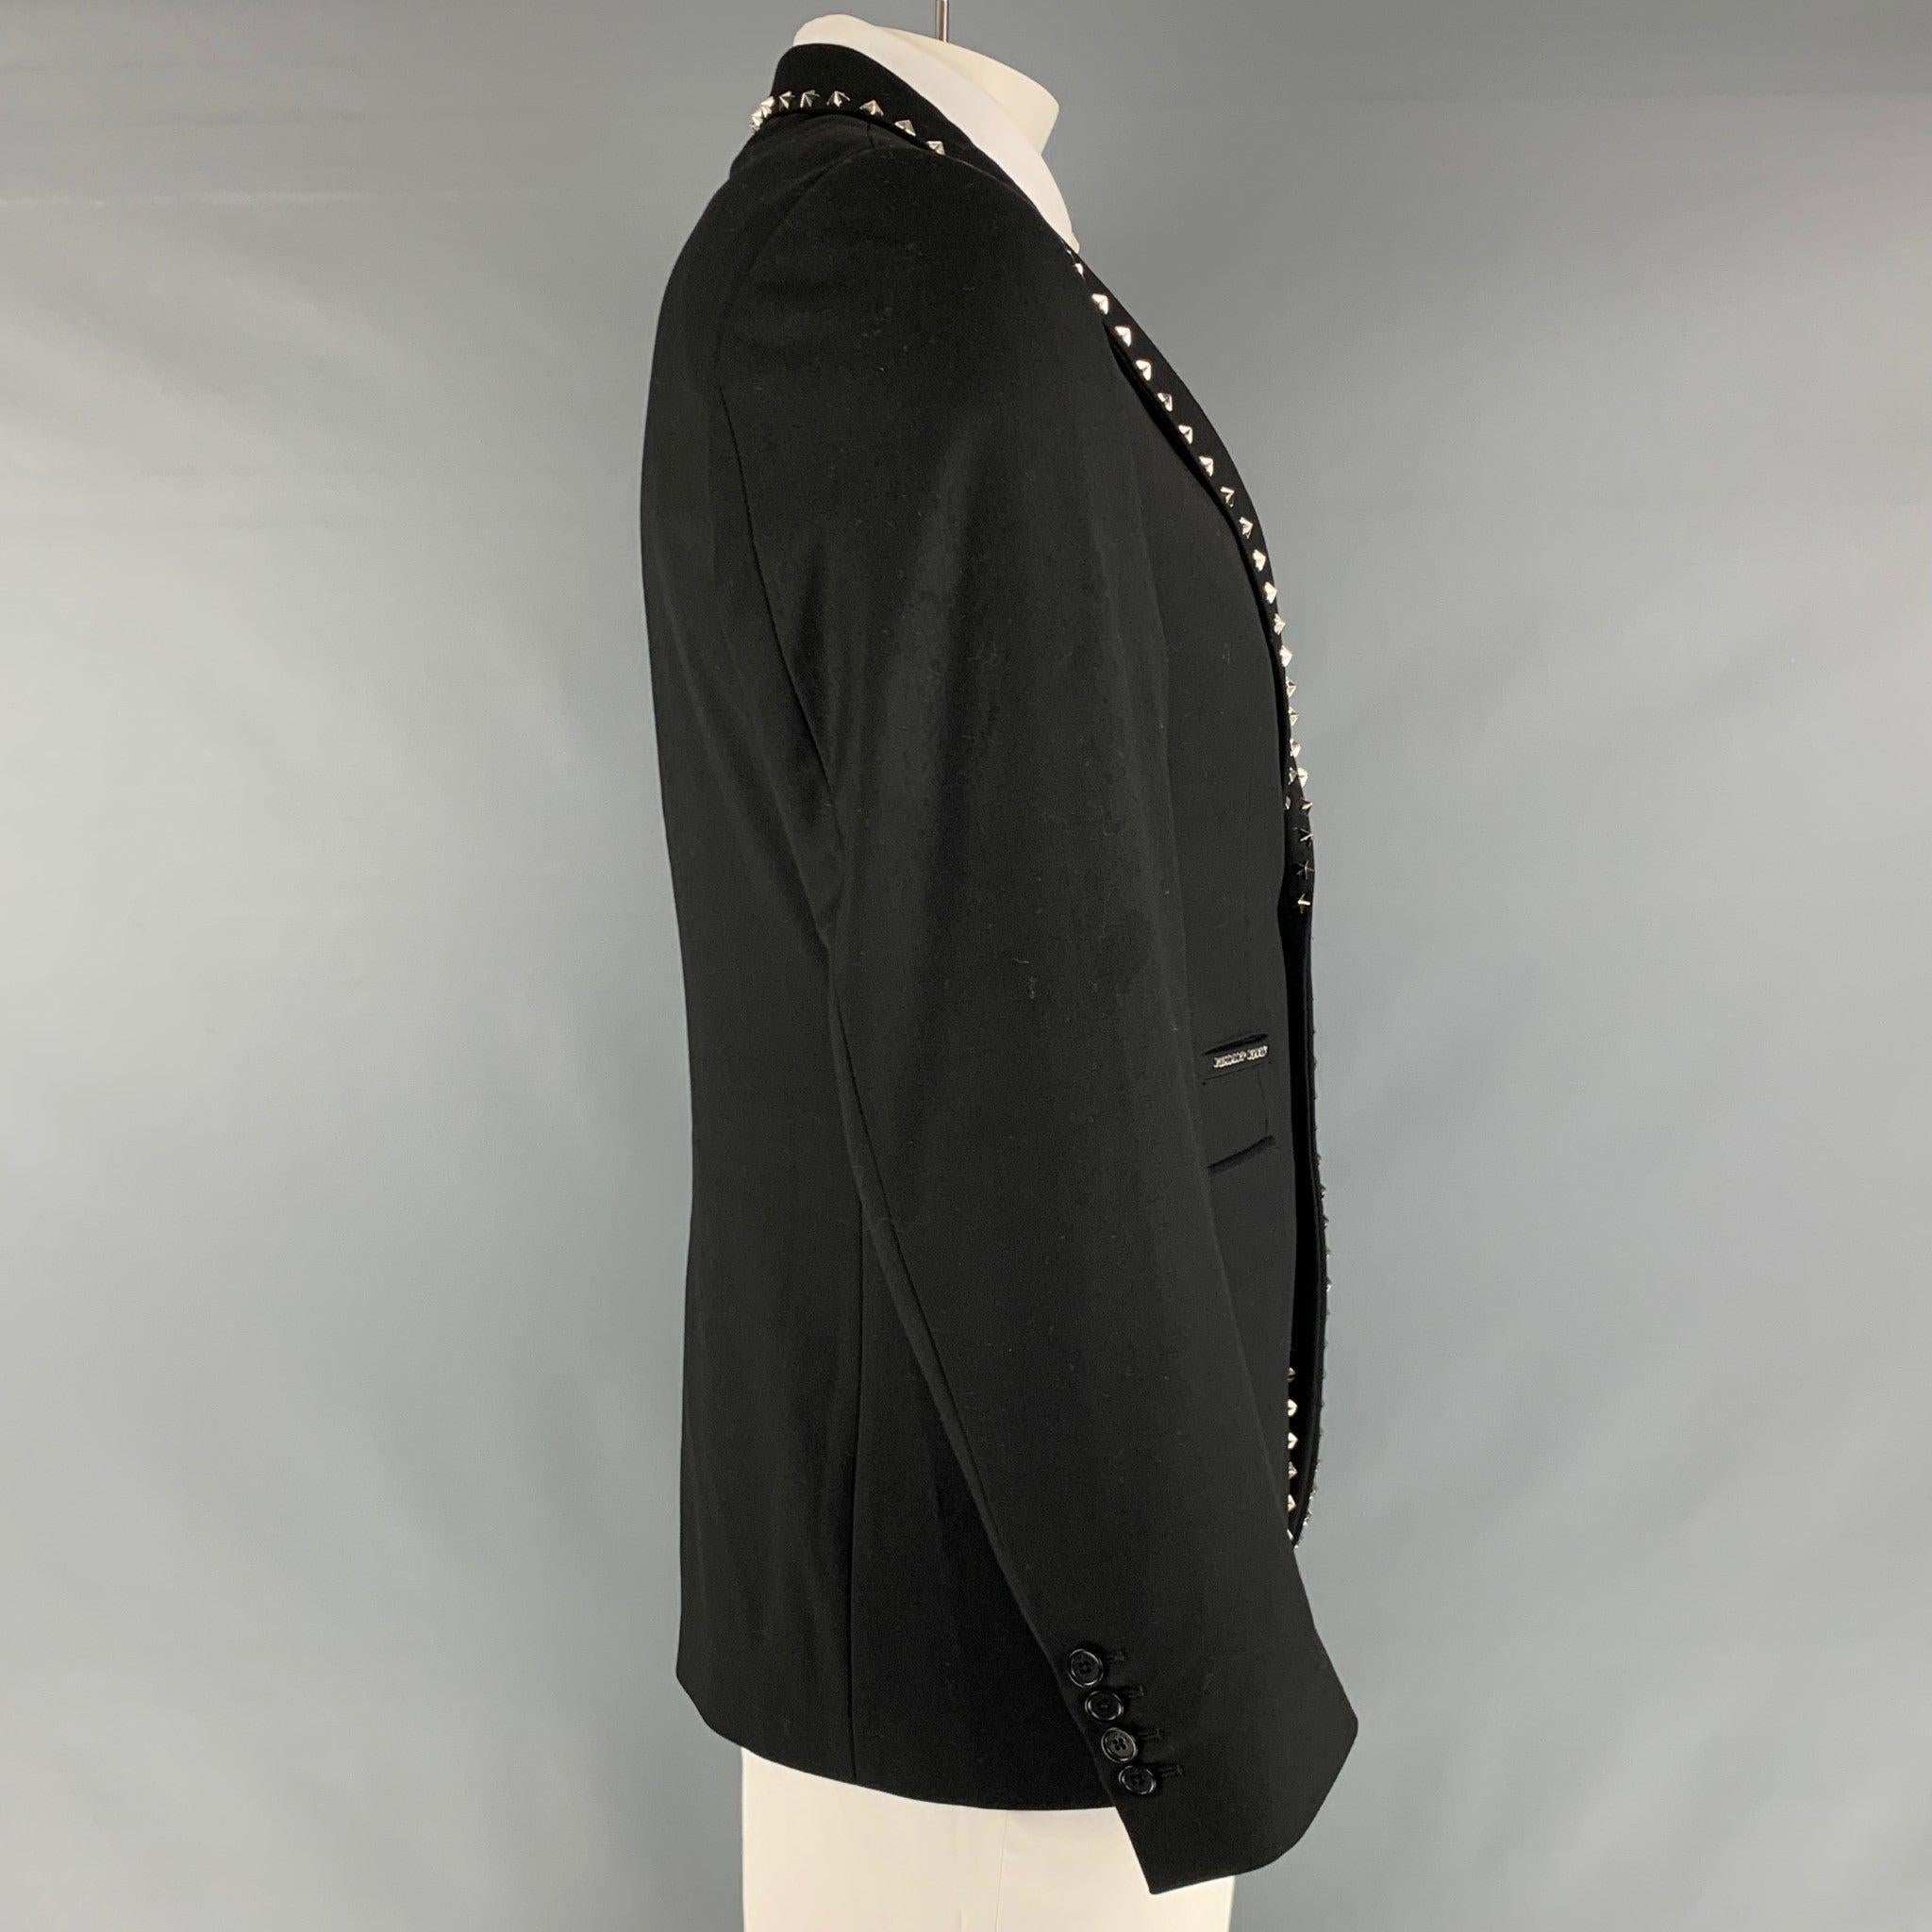 PHILIPP PLEIN sport coat comes in a black wool twill material with a full liner featuring a notch lapel, silver stars studs, single back vent, and a double button closure. Made in Italy. Very Good Pre-Owned Condition. Minor mark inside at lining.